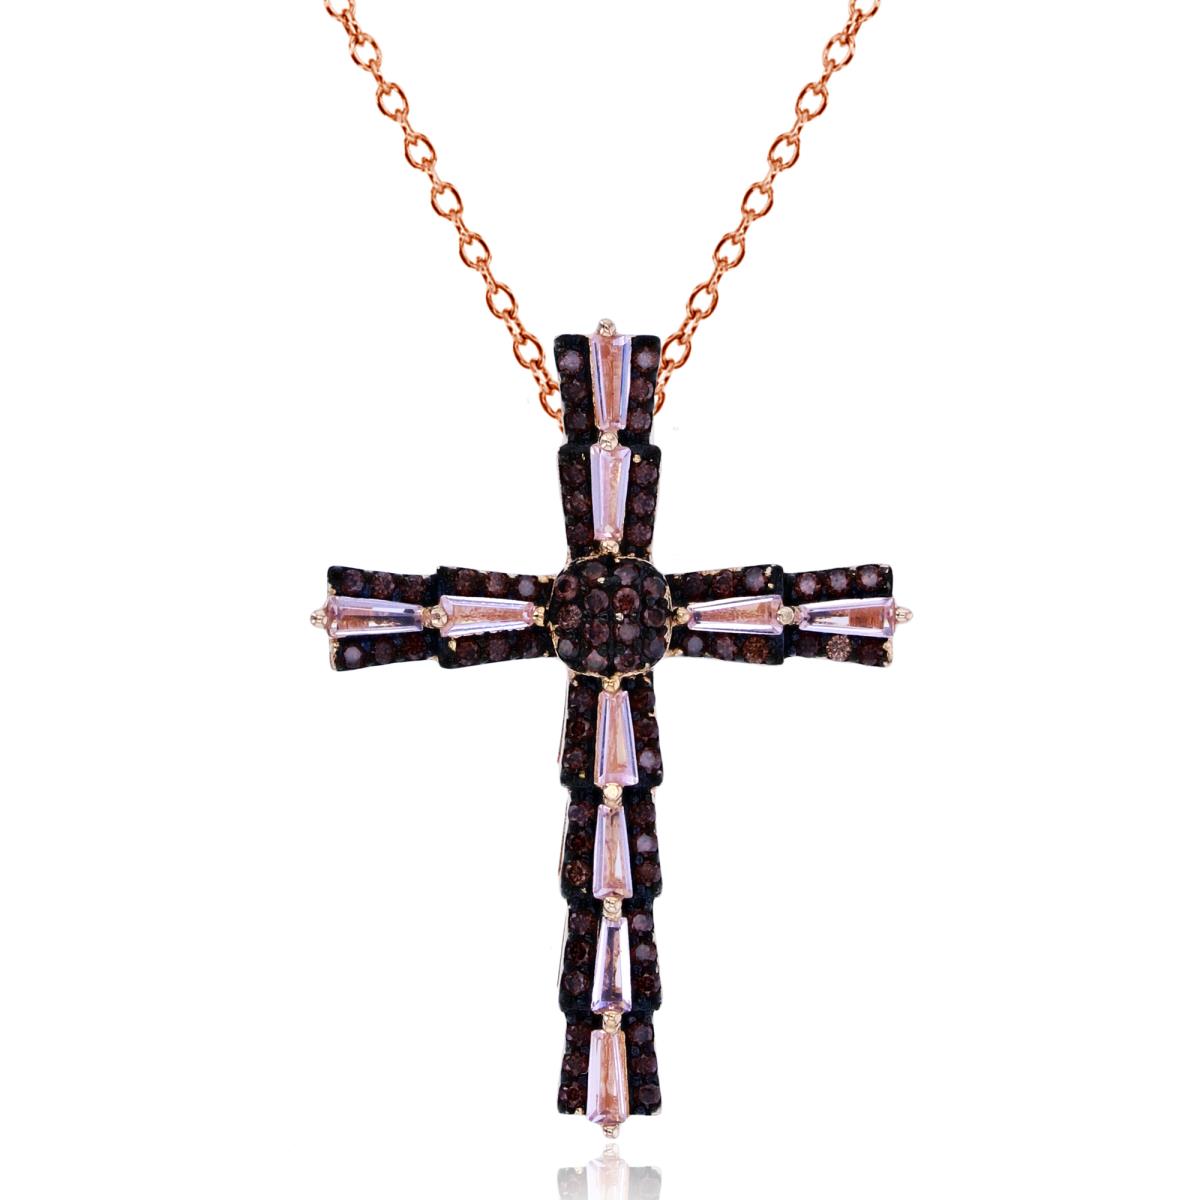 Sterling Silver+1Micron Rose Gold Rnd Brown & TB Morganite CZ Cross 18"Necklace